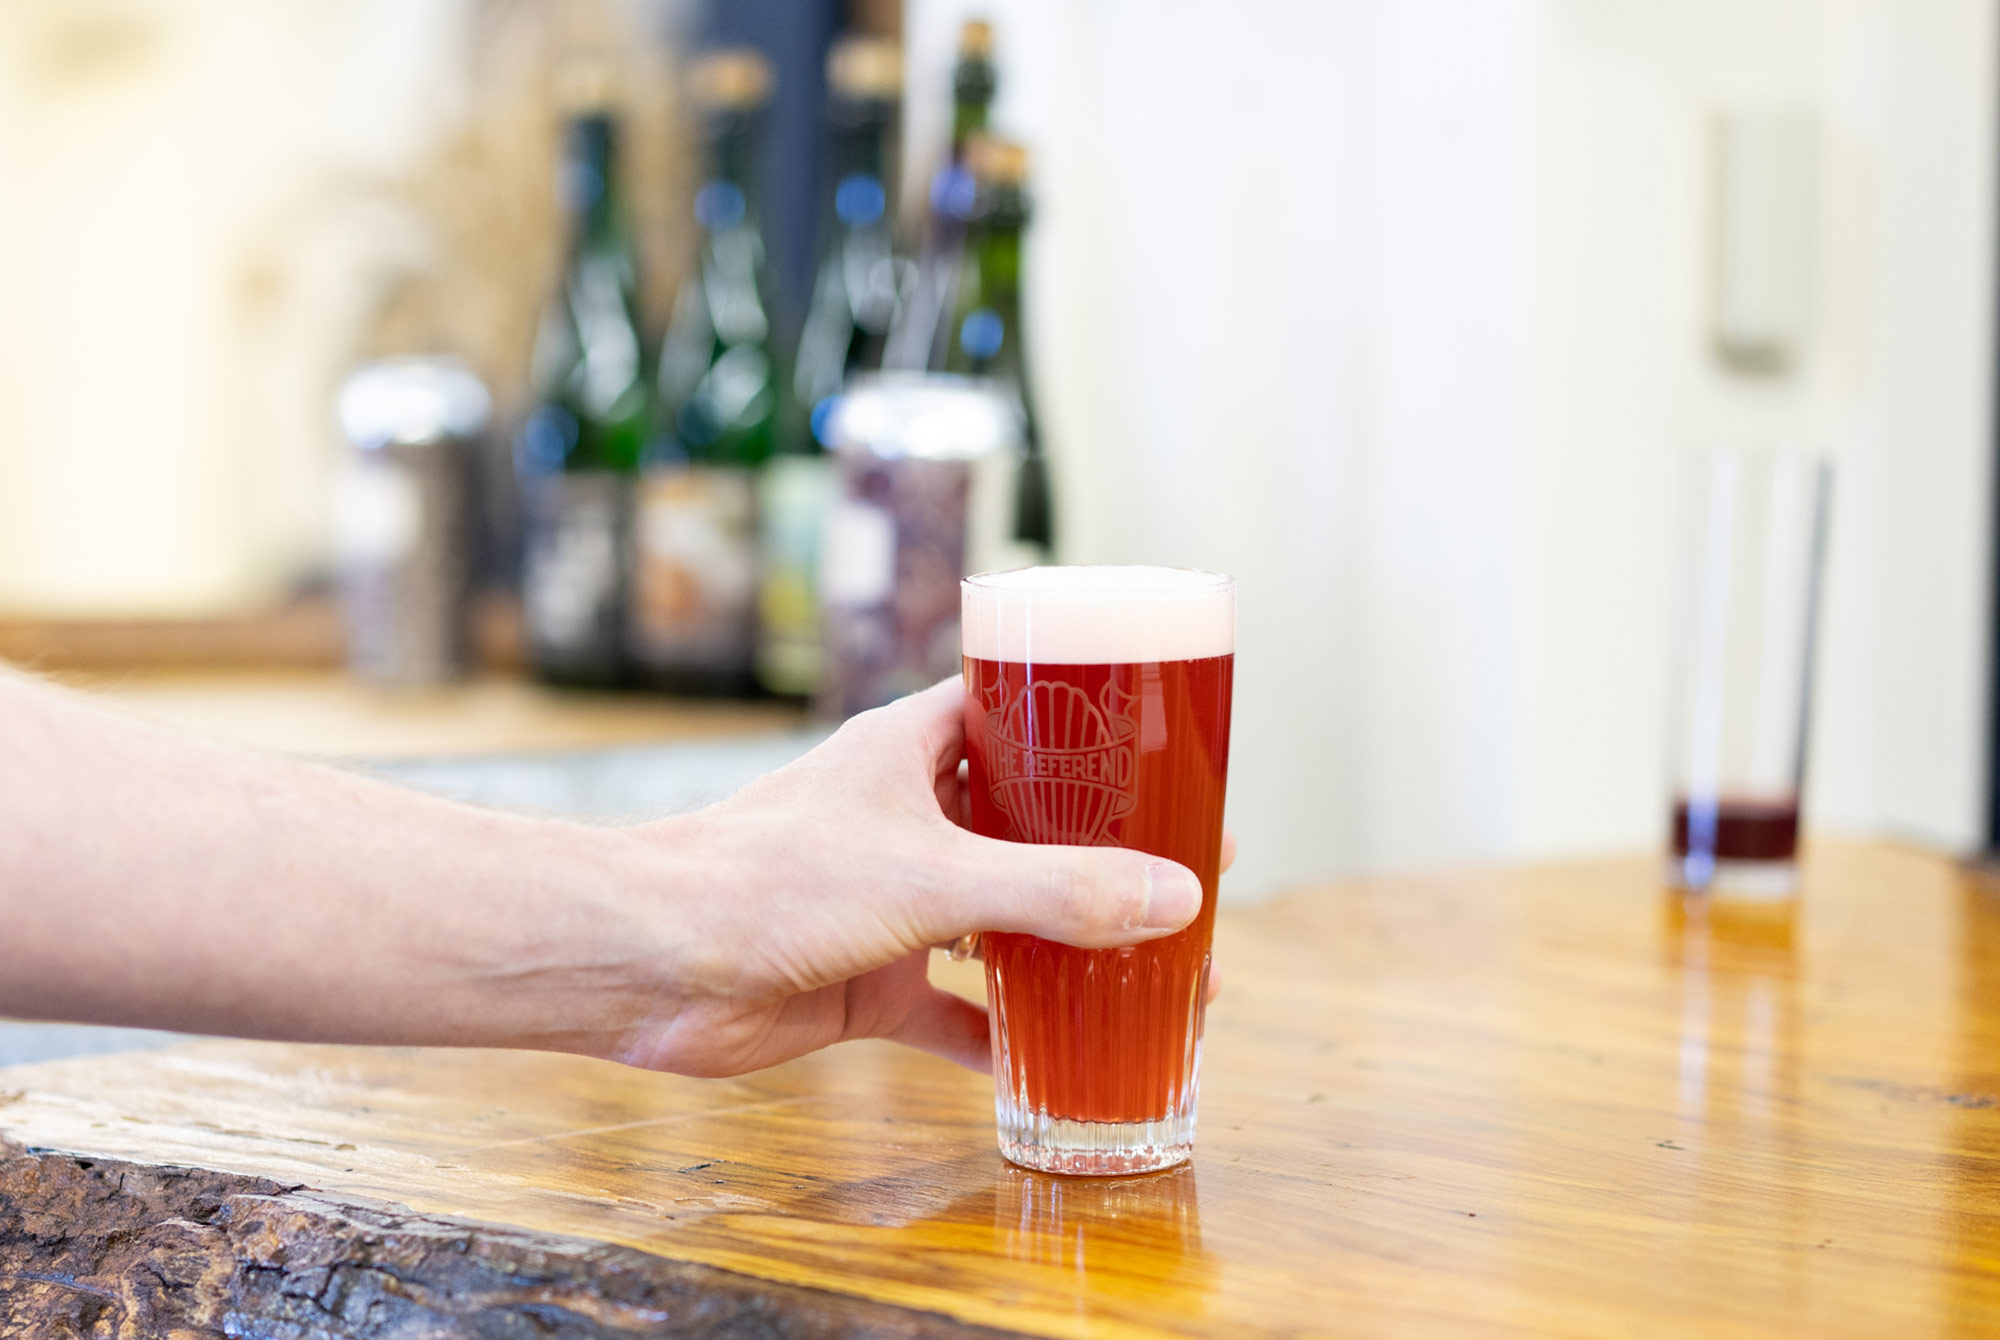 7 Trends in the Beer Industry to Watch in 2019